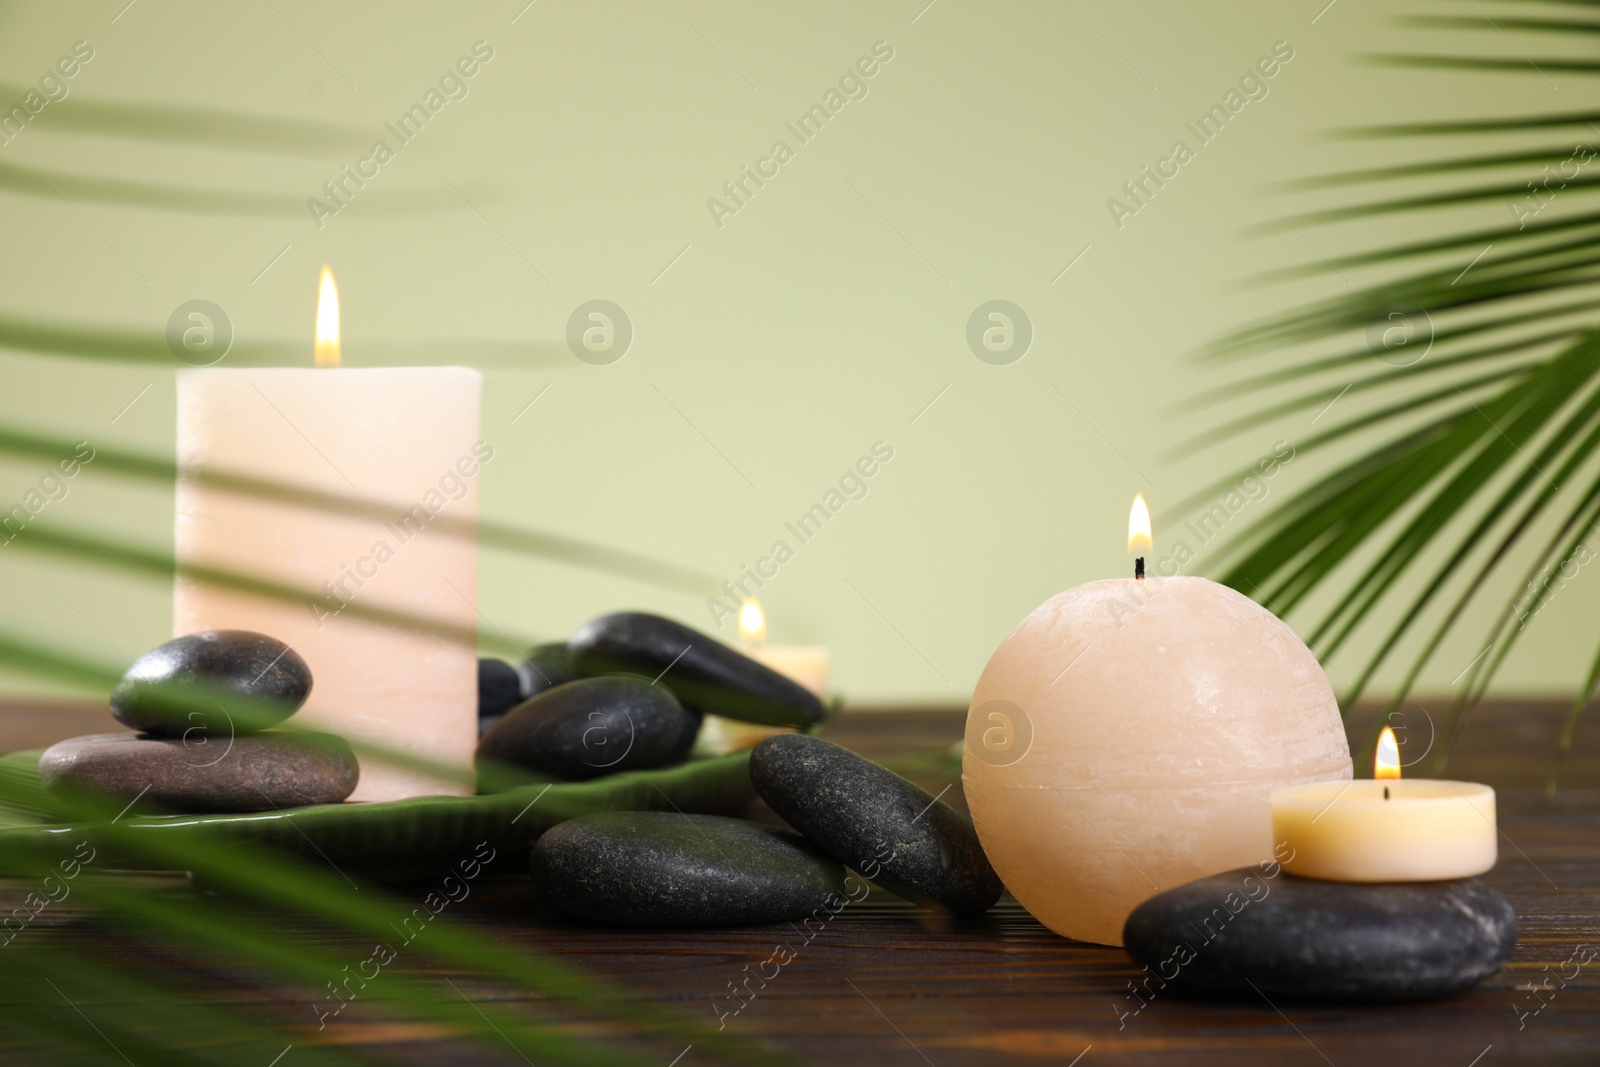 Photo of Composition of spa stones and burning candles on wooden table against light green background